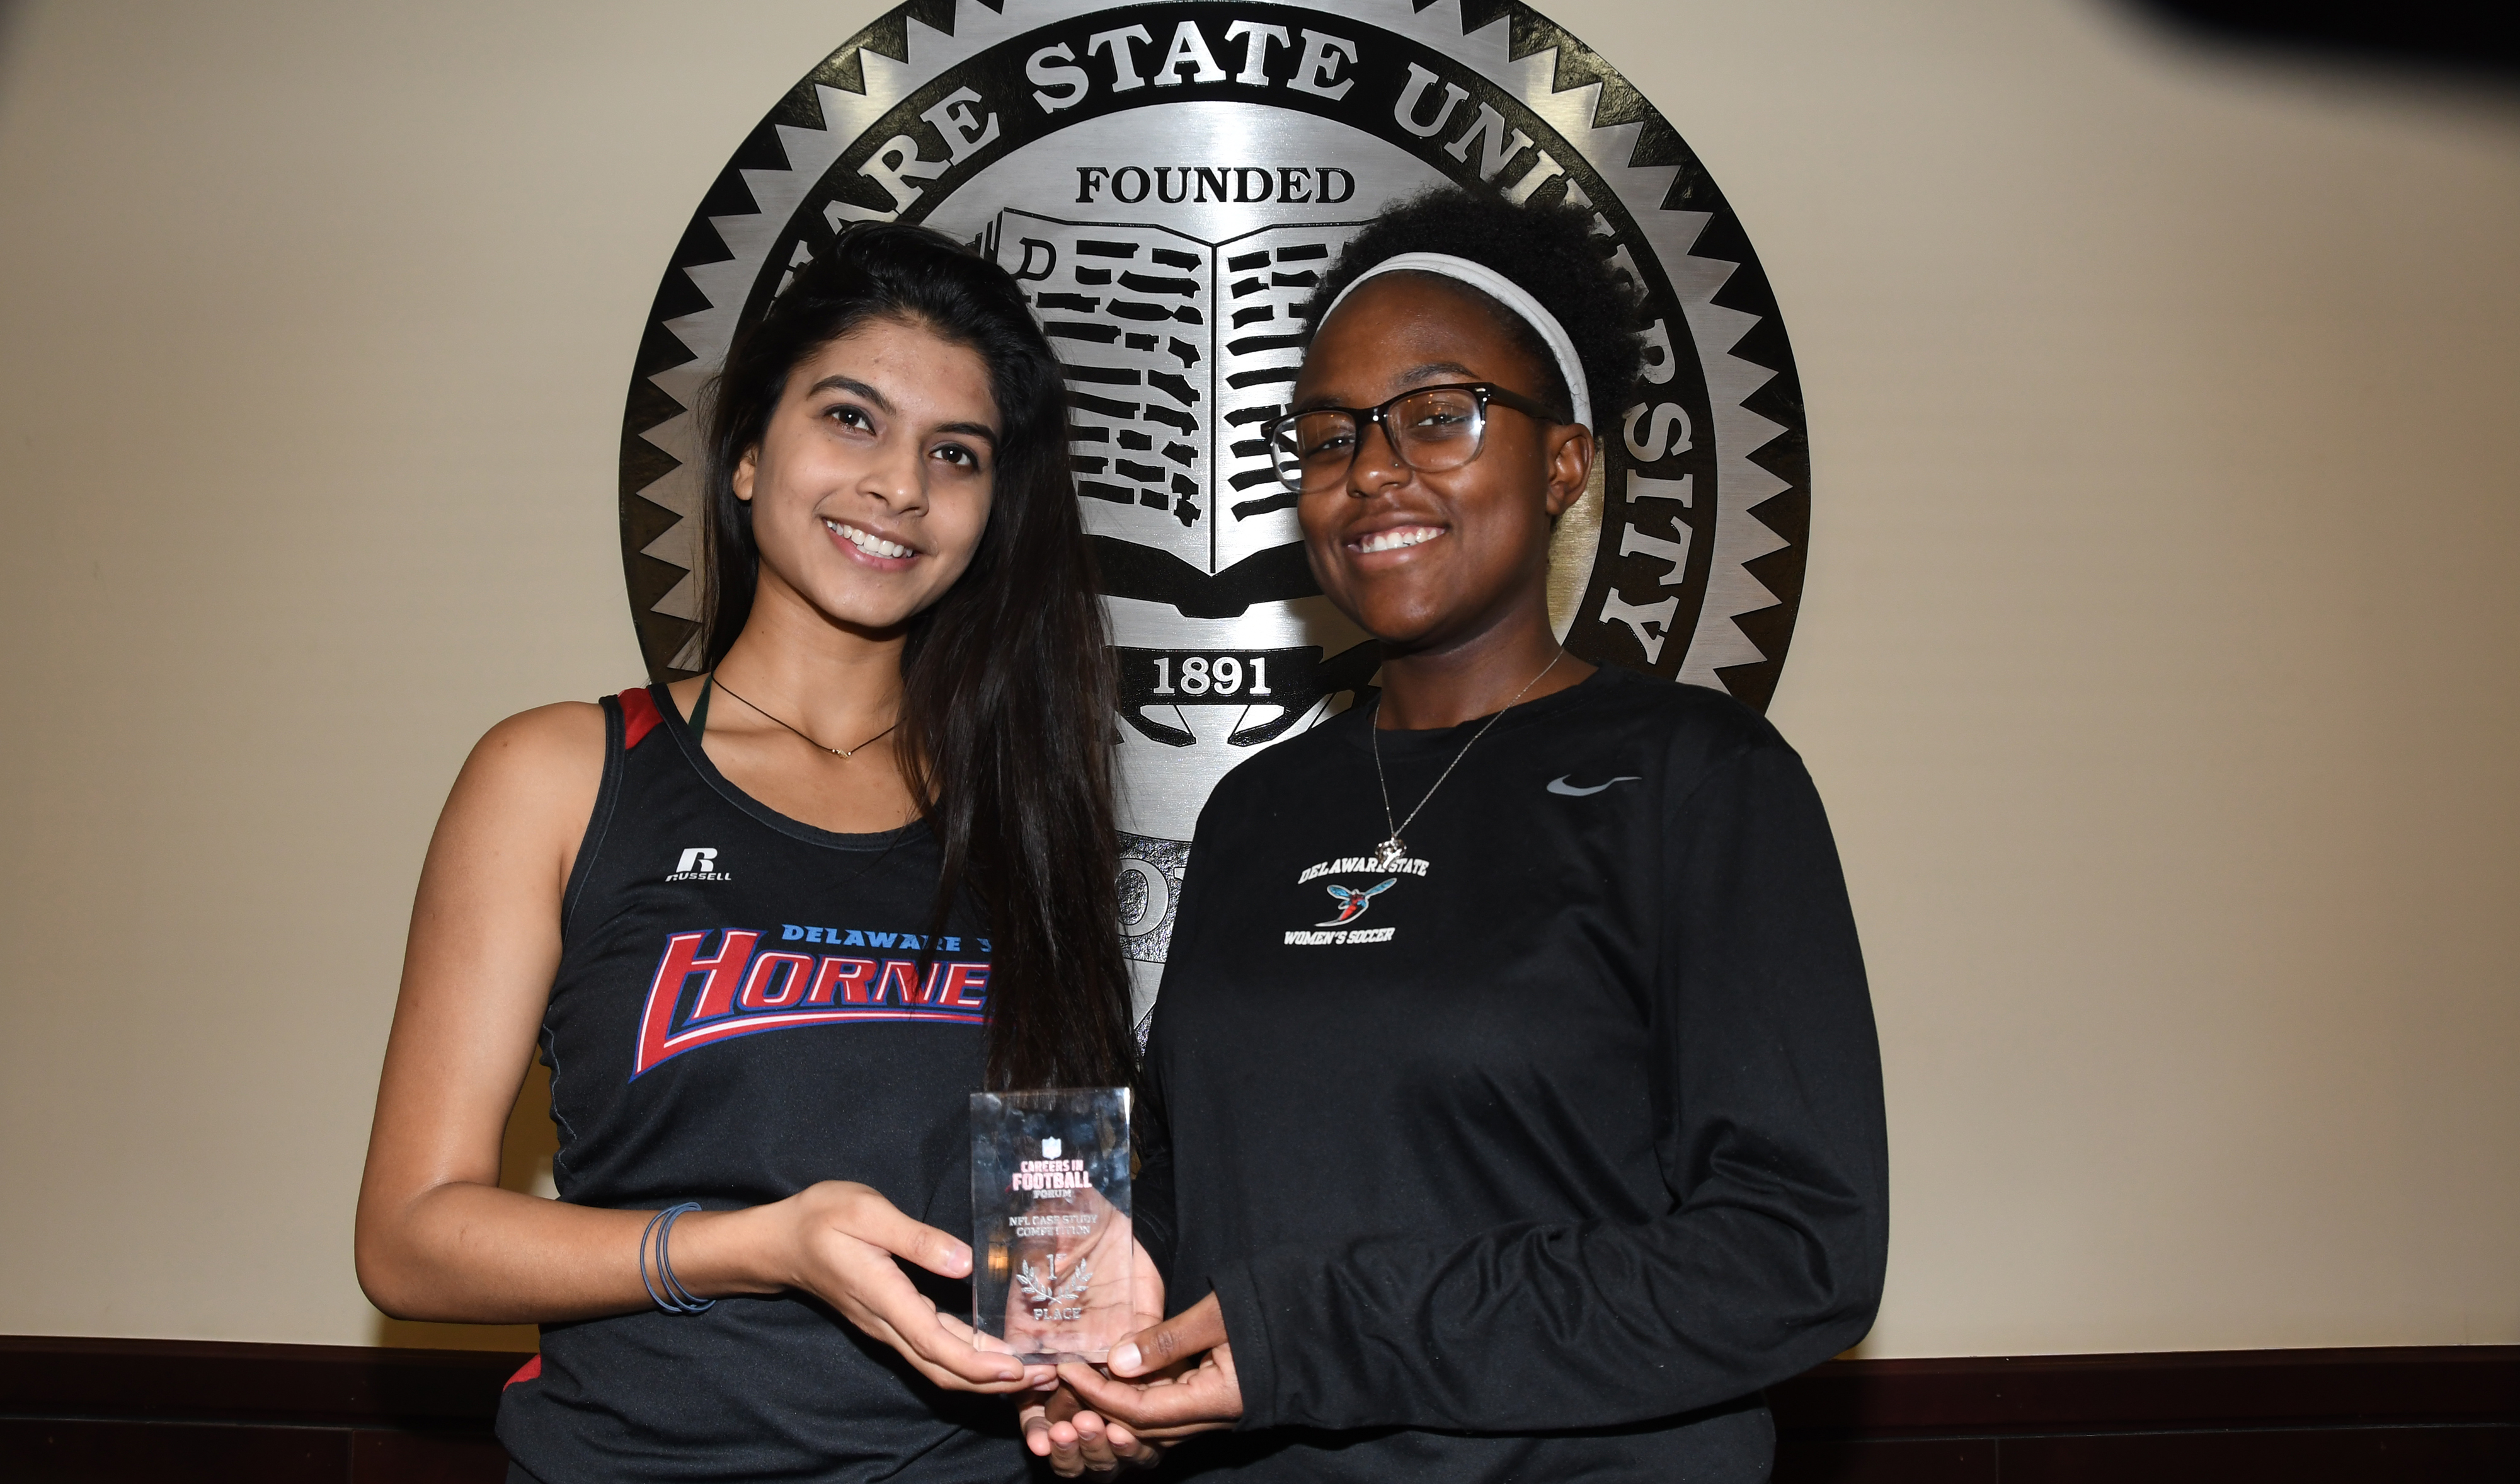 (L-r) Aayushi Chouhan and Braxton Clark represented the University well as they were on the first and second place teams, respectively, in the Business Case Studies Competition at the recent NFL Careers in Football Forum held in Atlanta. The two are holding Ms. Chouhan's first-place trophy (Ms. Clark has already placed her second place trophy in her parent's home).